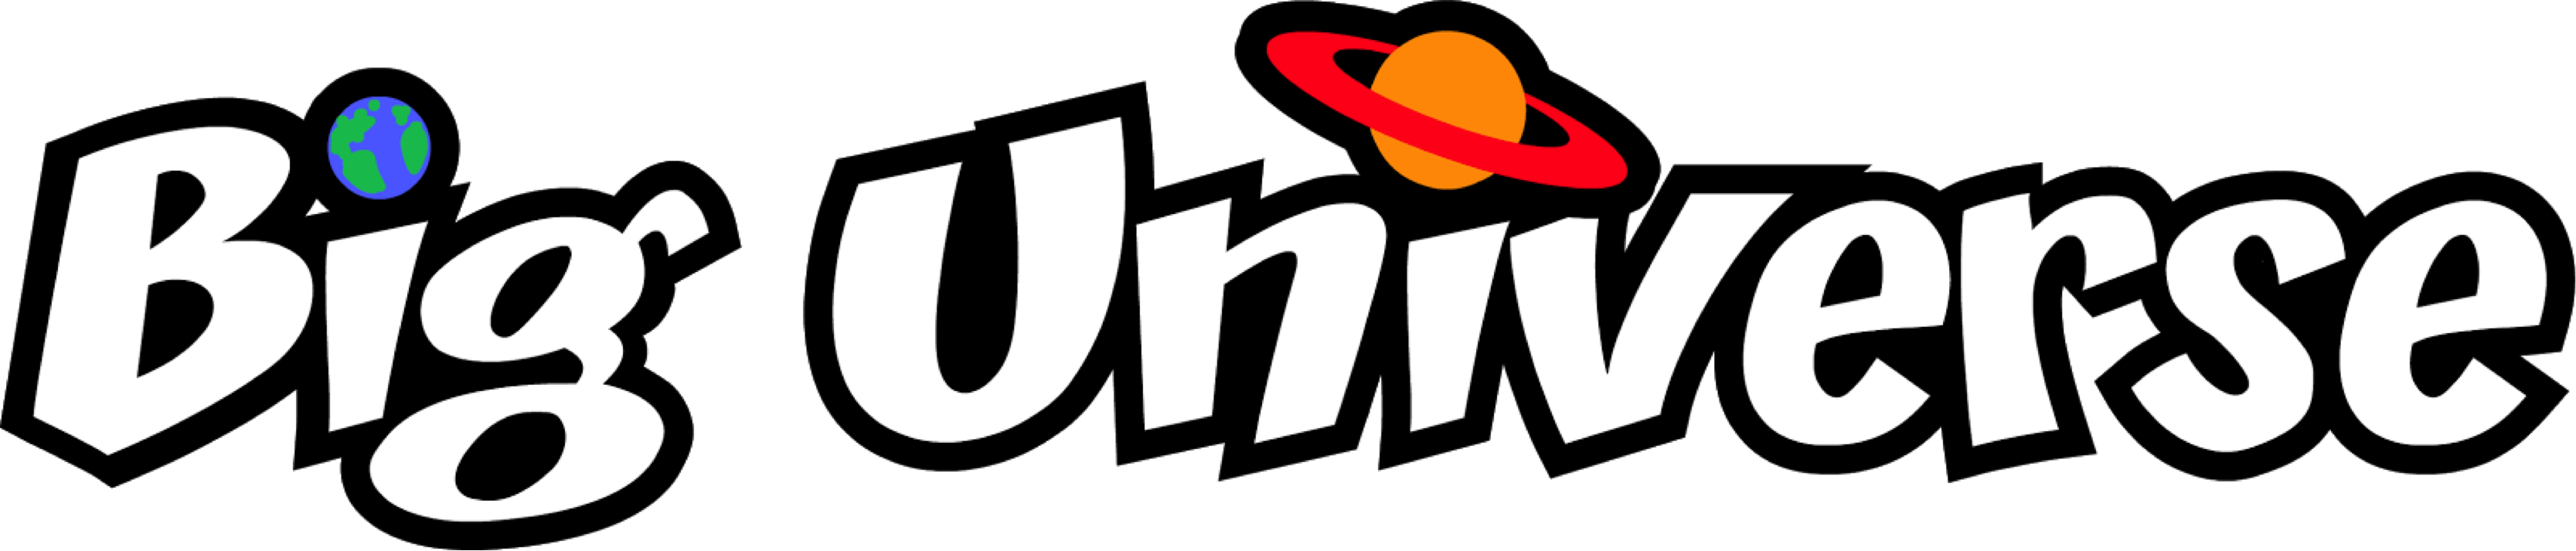 universe clipart real